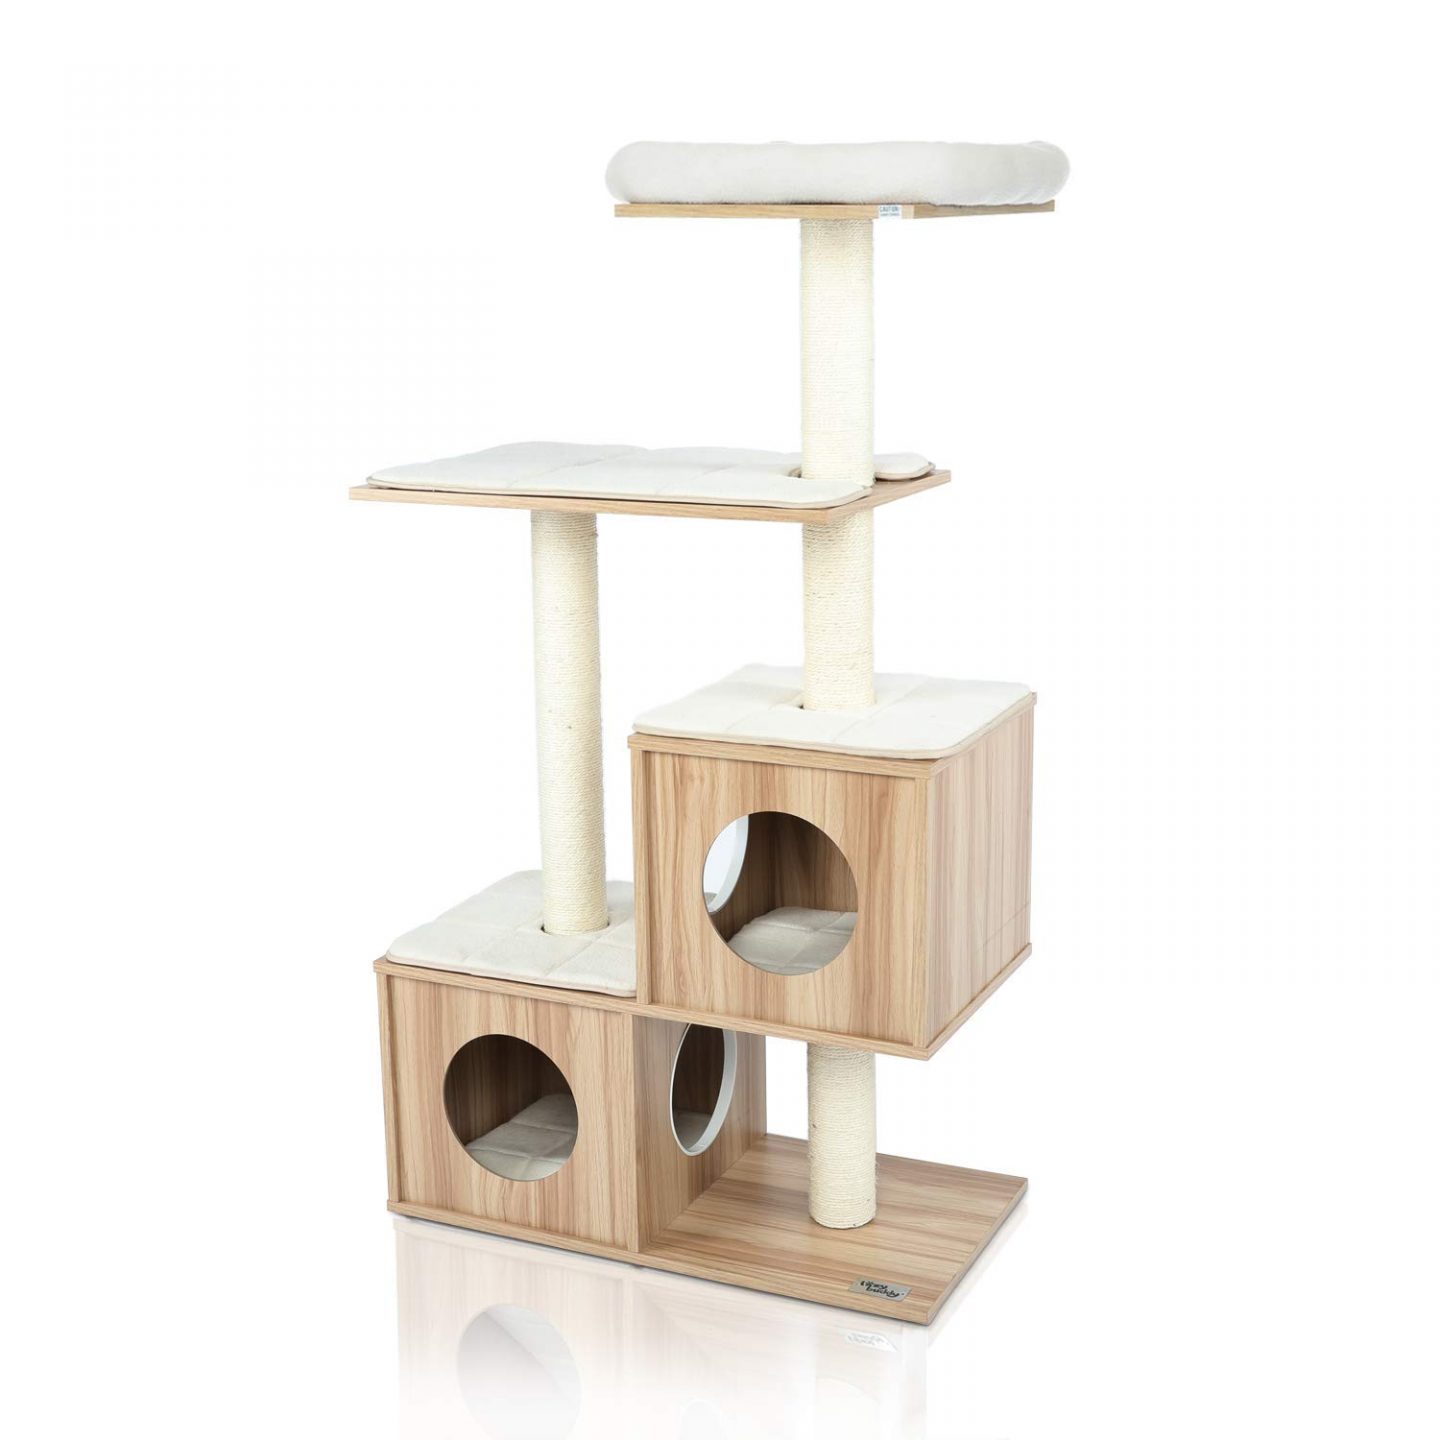 Affordable wood cat tree for large cats.  It's beautiful and perfect for big cats who you are wanting to give a little extra TLC to.